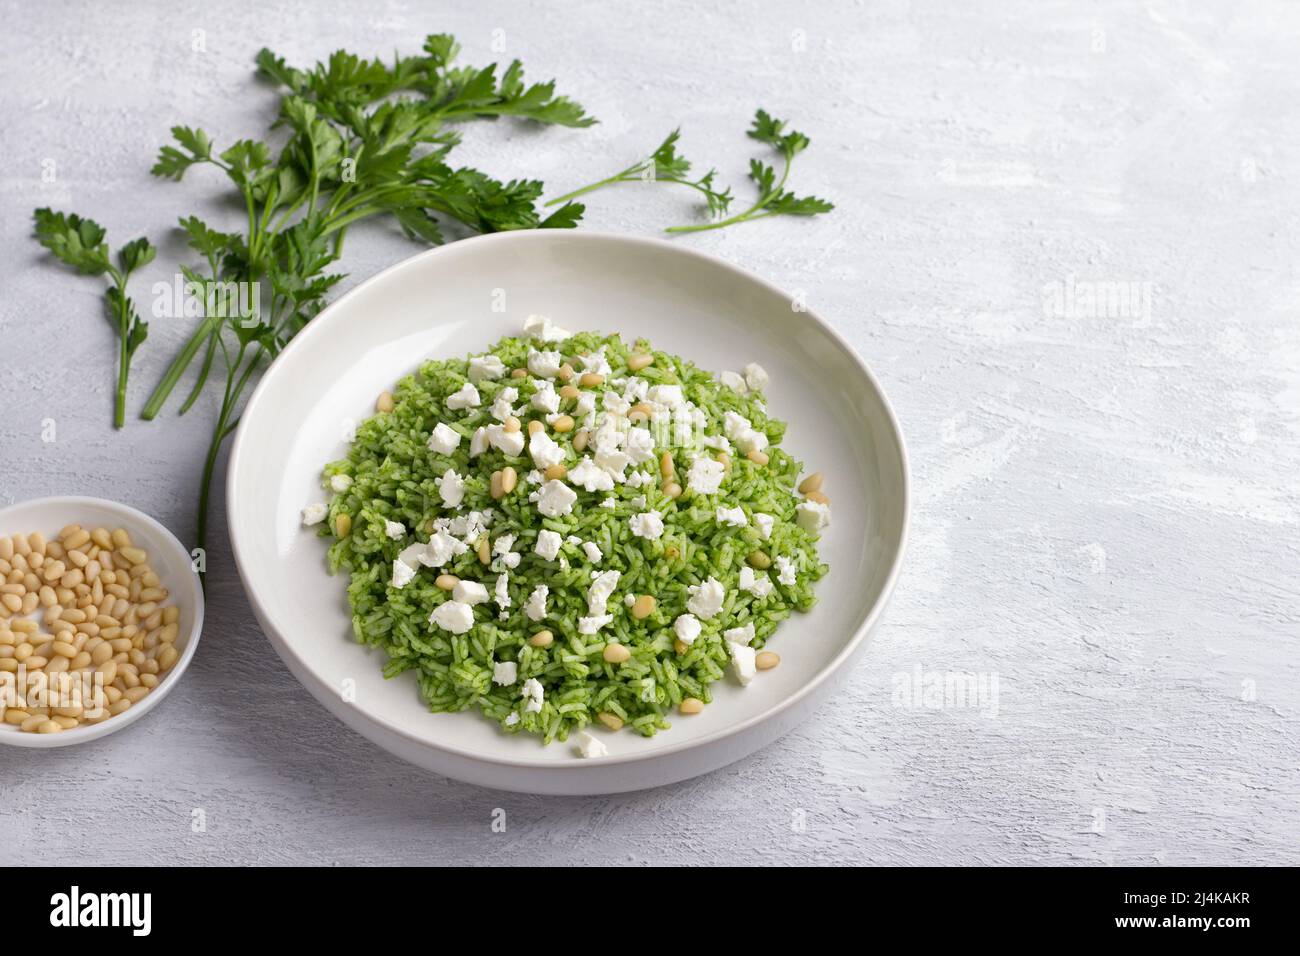 Plate of green rice with pine nuts, feta cheese and parsley on a gray background, free space. healthy vegetarian food Stock Photo